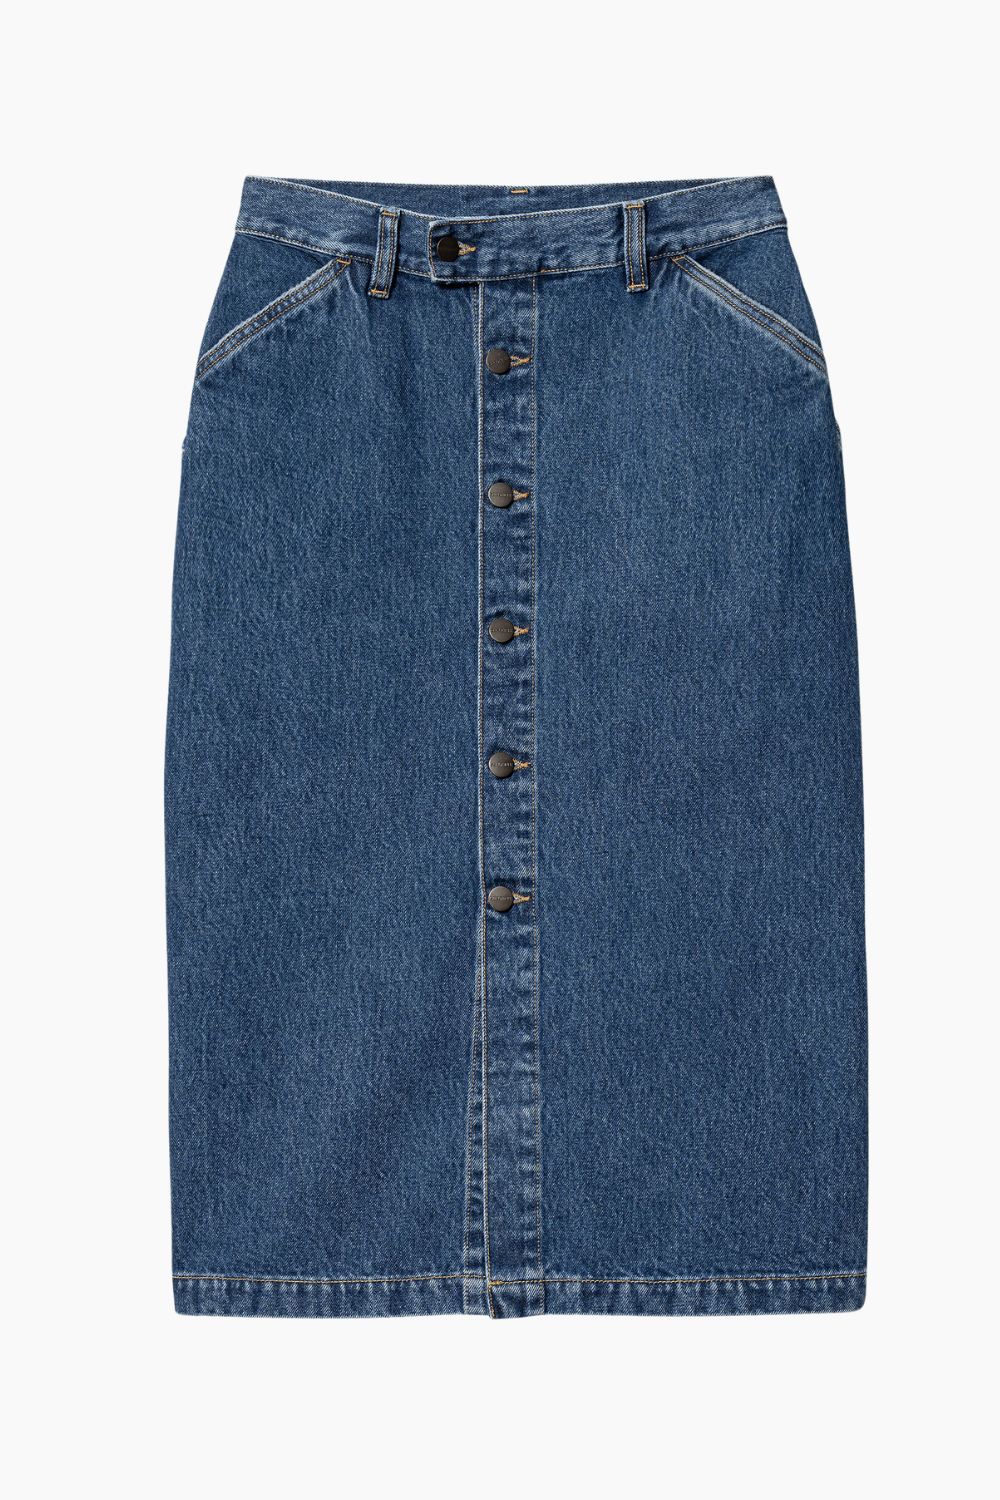 W' Colby Skirt - Blue (Stone Washed) - Carhartt WIP